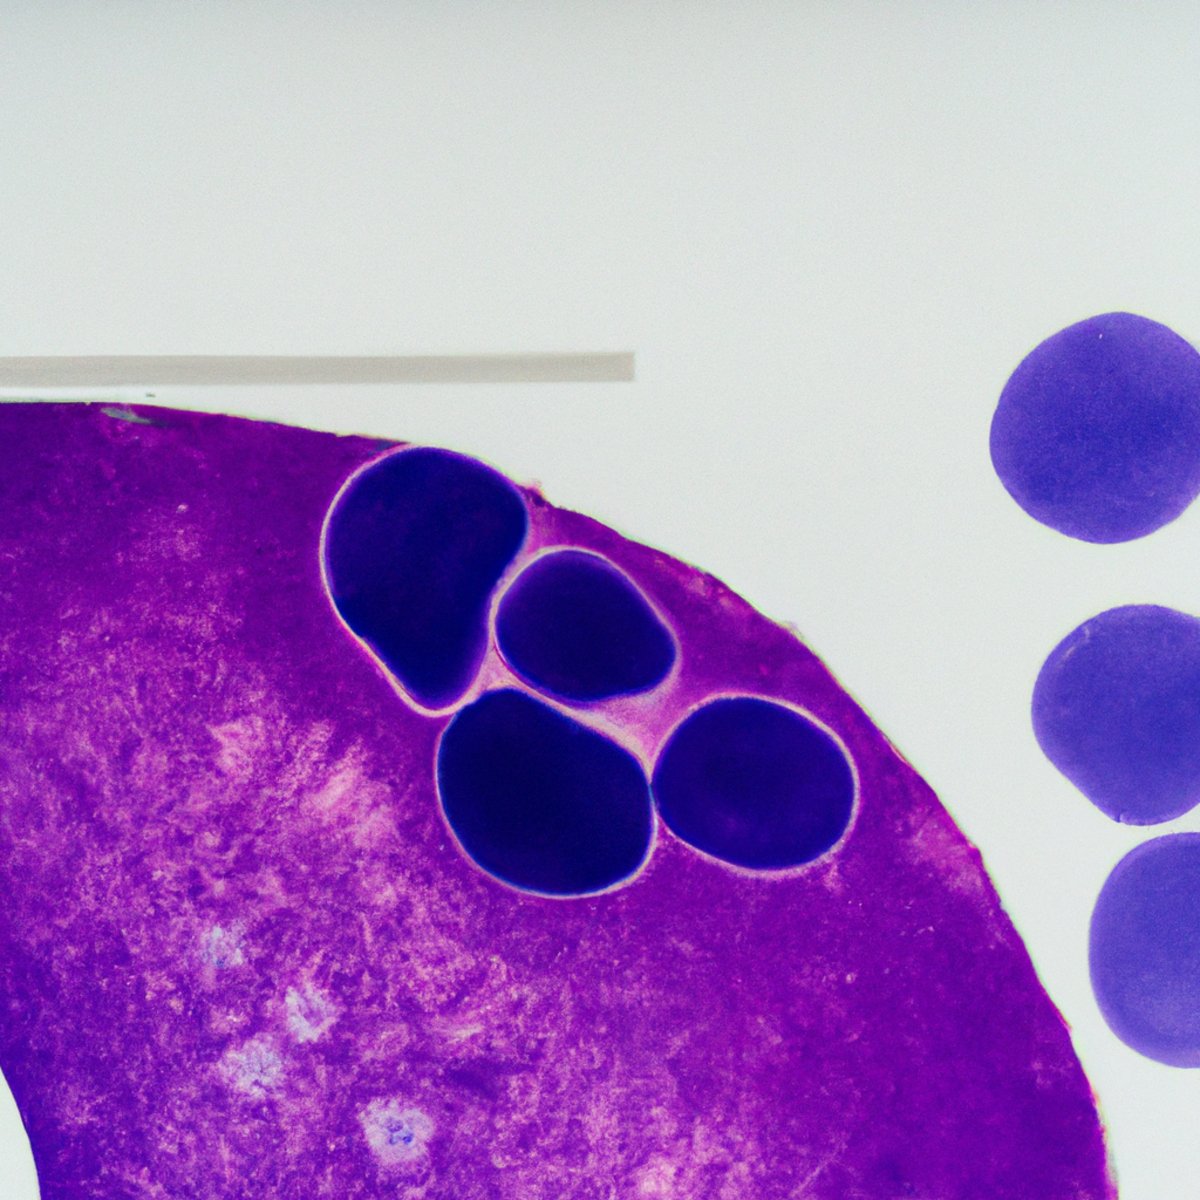 Close-up of vibrant stained pancreatic cells on microscope slide, surrounded by scientific instruments and equipment - Nesidioblastosis